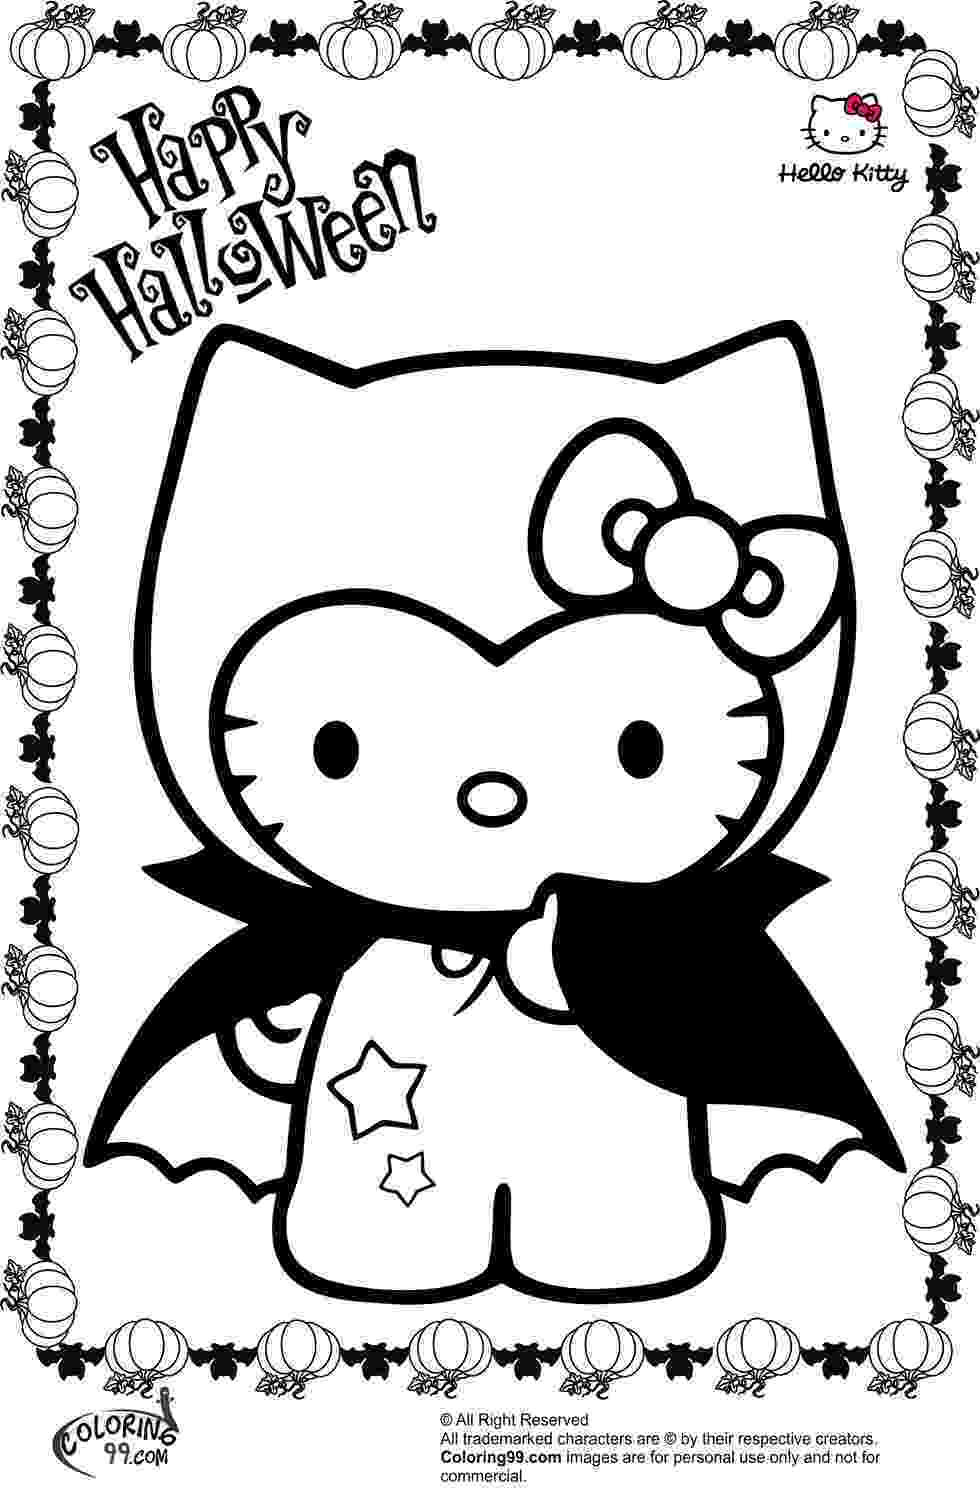 halloween coloring pages to color online 24 free printable halloween coloring pages for kids coloring online to pages halloween color 